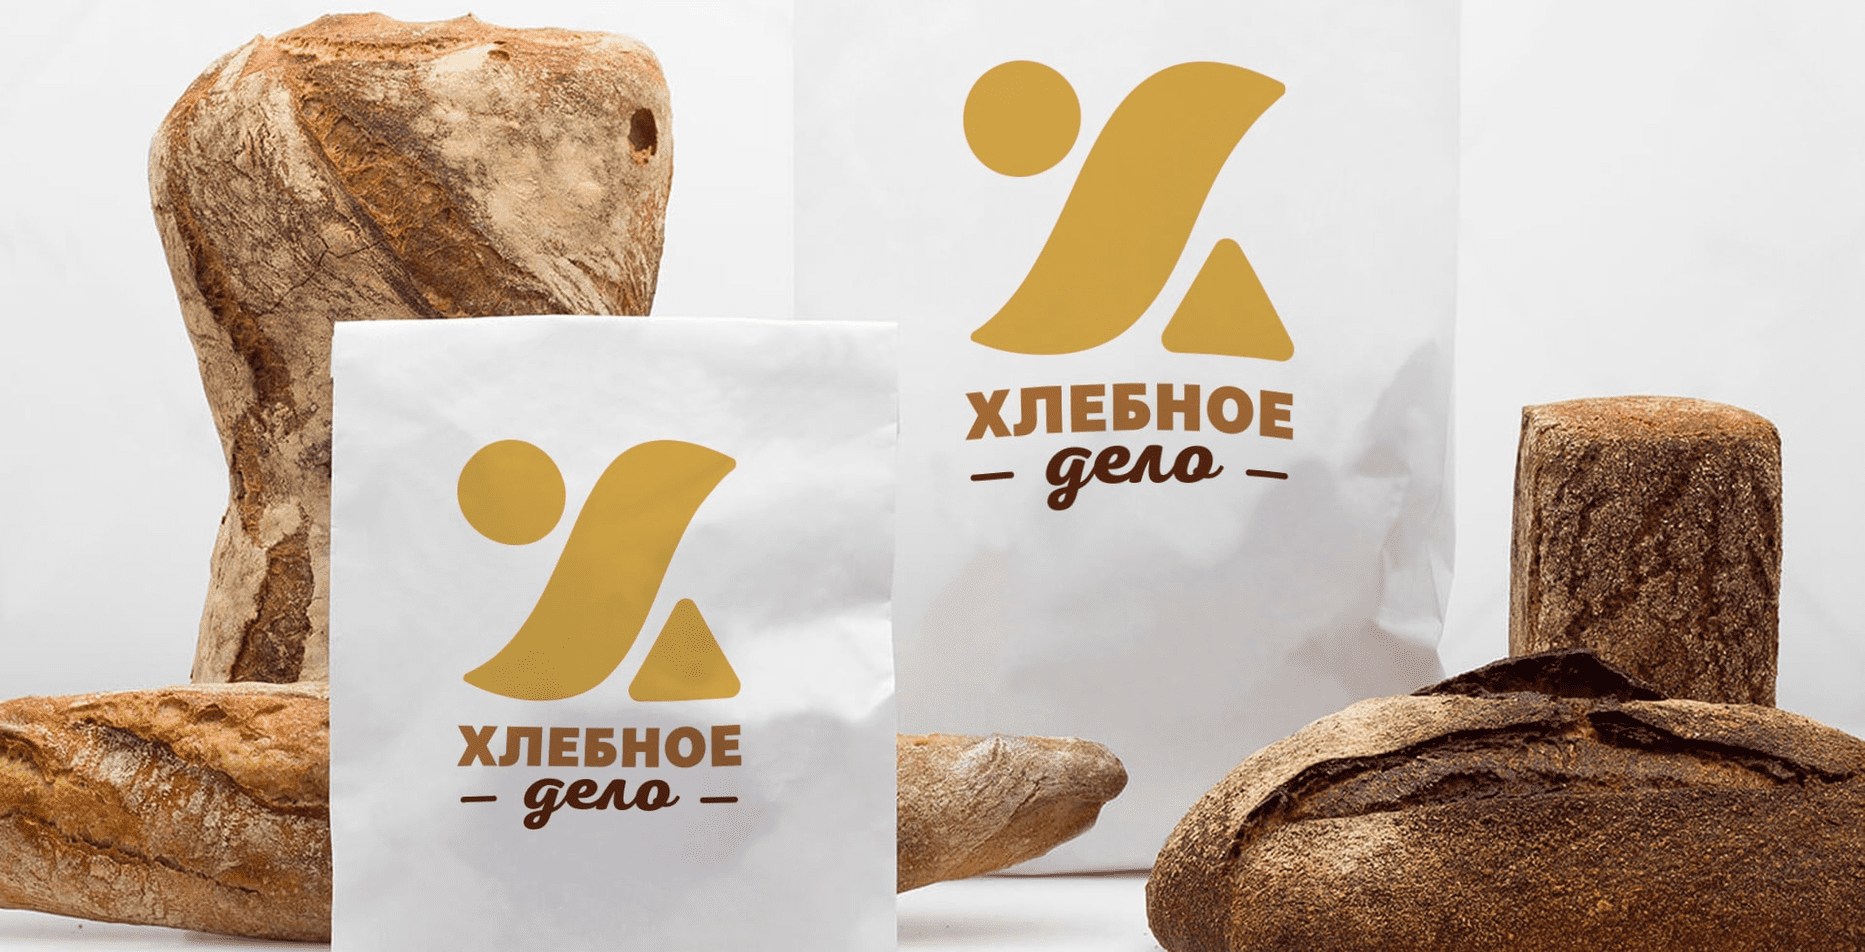 Case: logo design, branding and marketing kit for the bread business — Rubarb - Image - 8